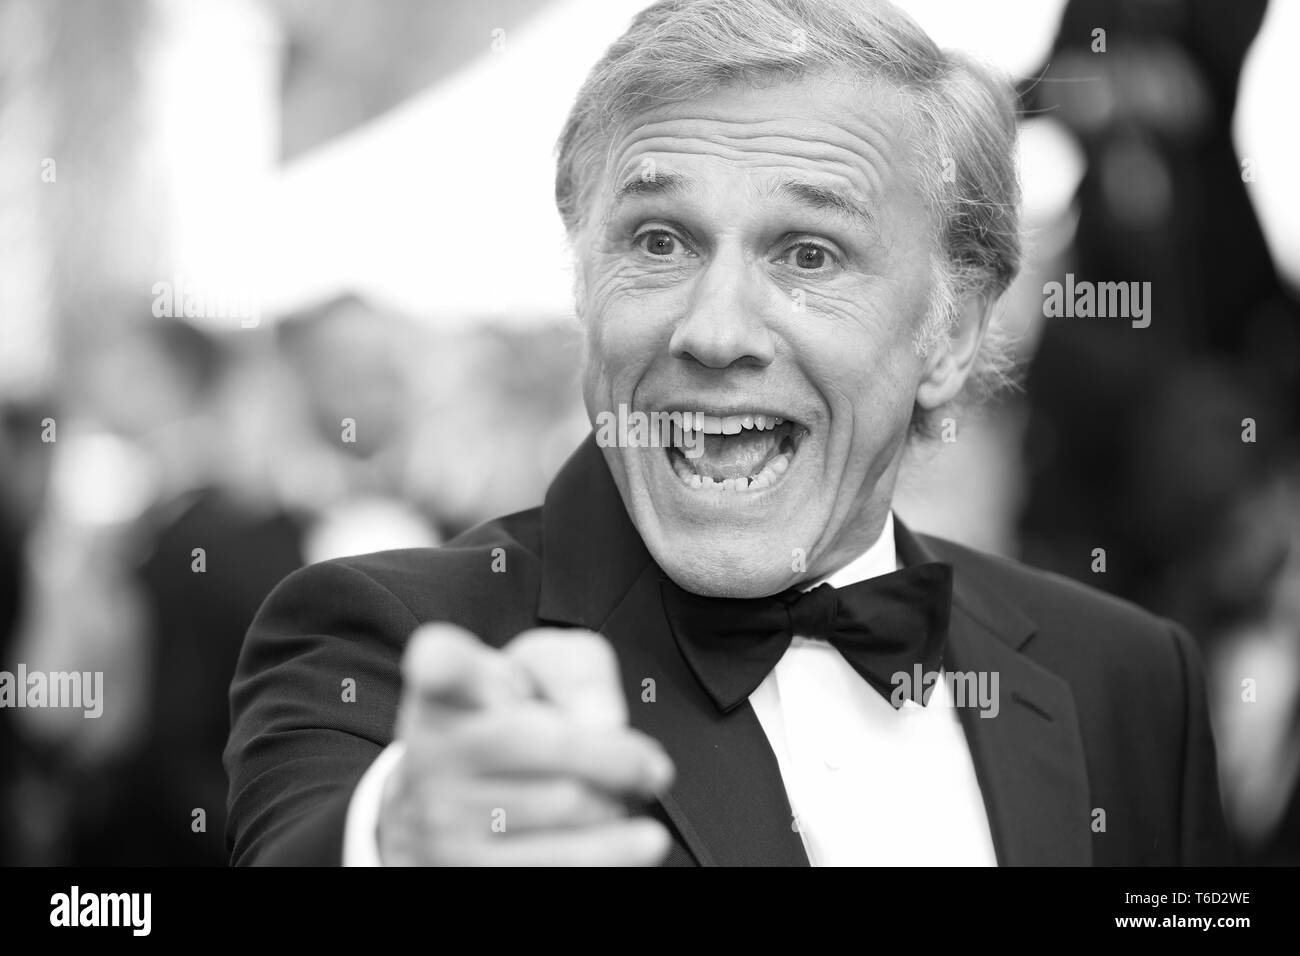 CANNES, FRANCE – MAY 23, 2017: Christoph Waltz on the Cannes Film Festival 70th anniversary celebration red carpet (Photo: Mickael Chavet) Stock Photo